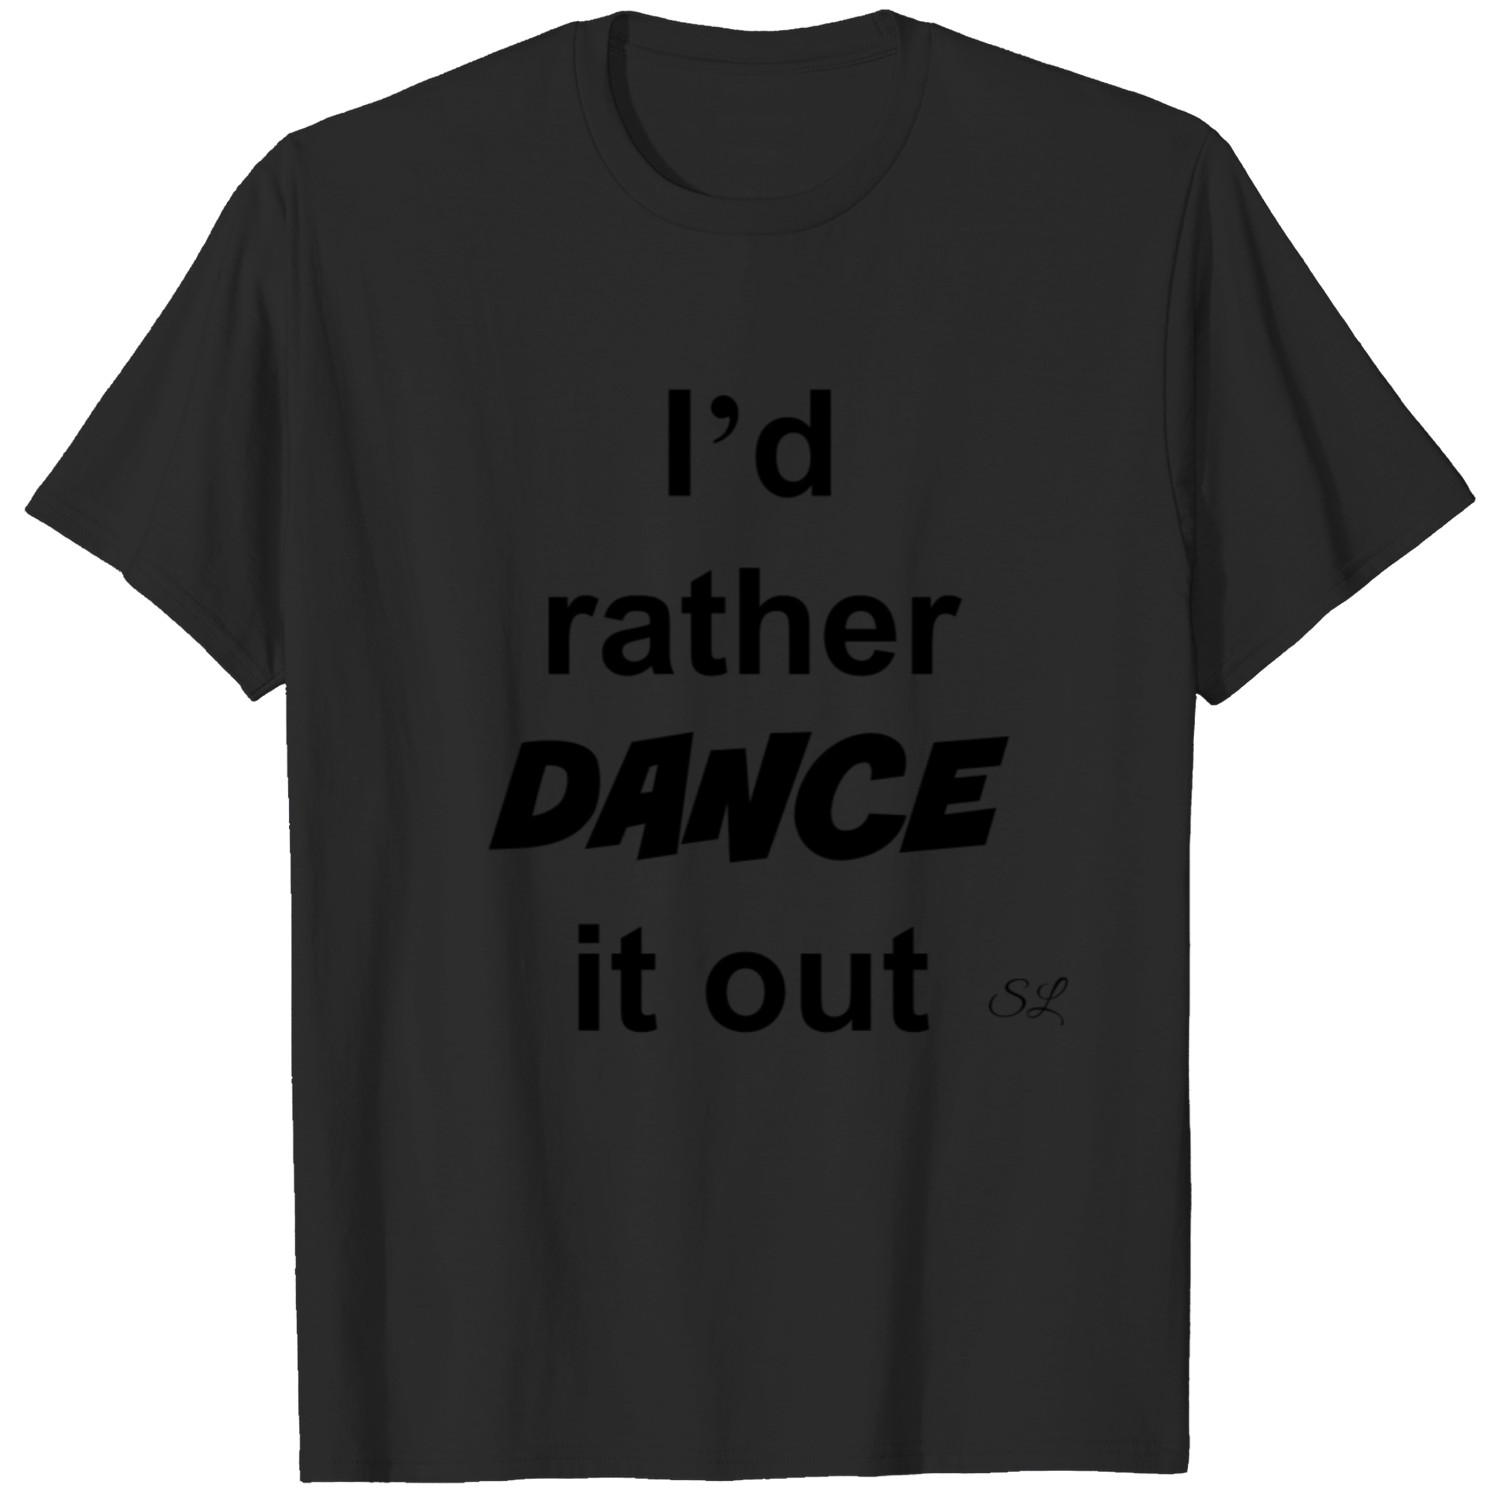 DANCE it out T-shirt by Stephanie Lahart T-shirt